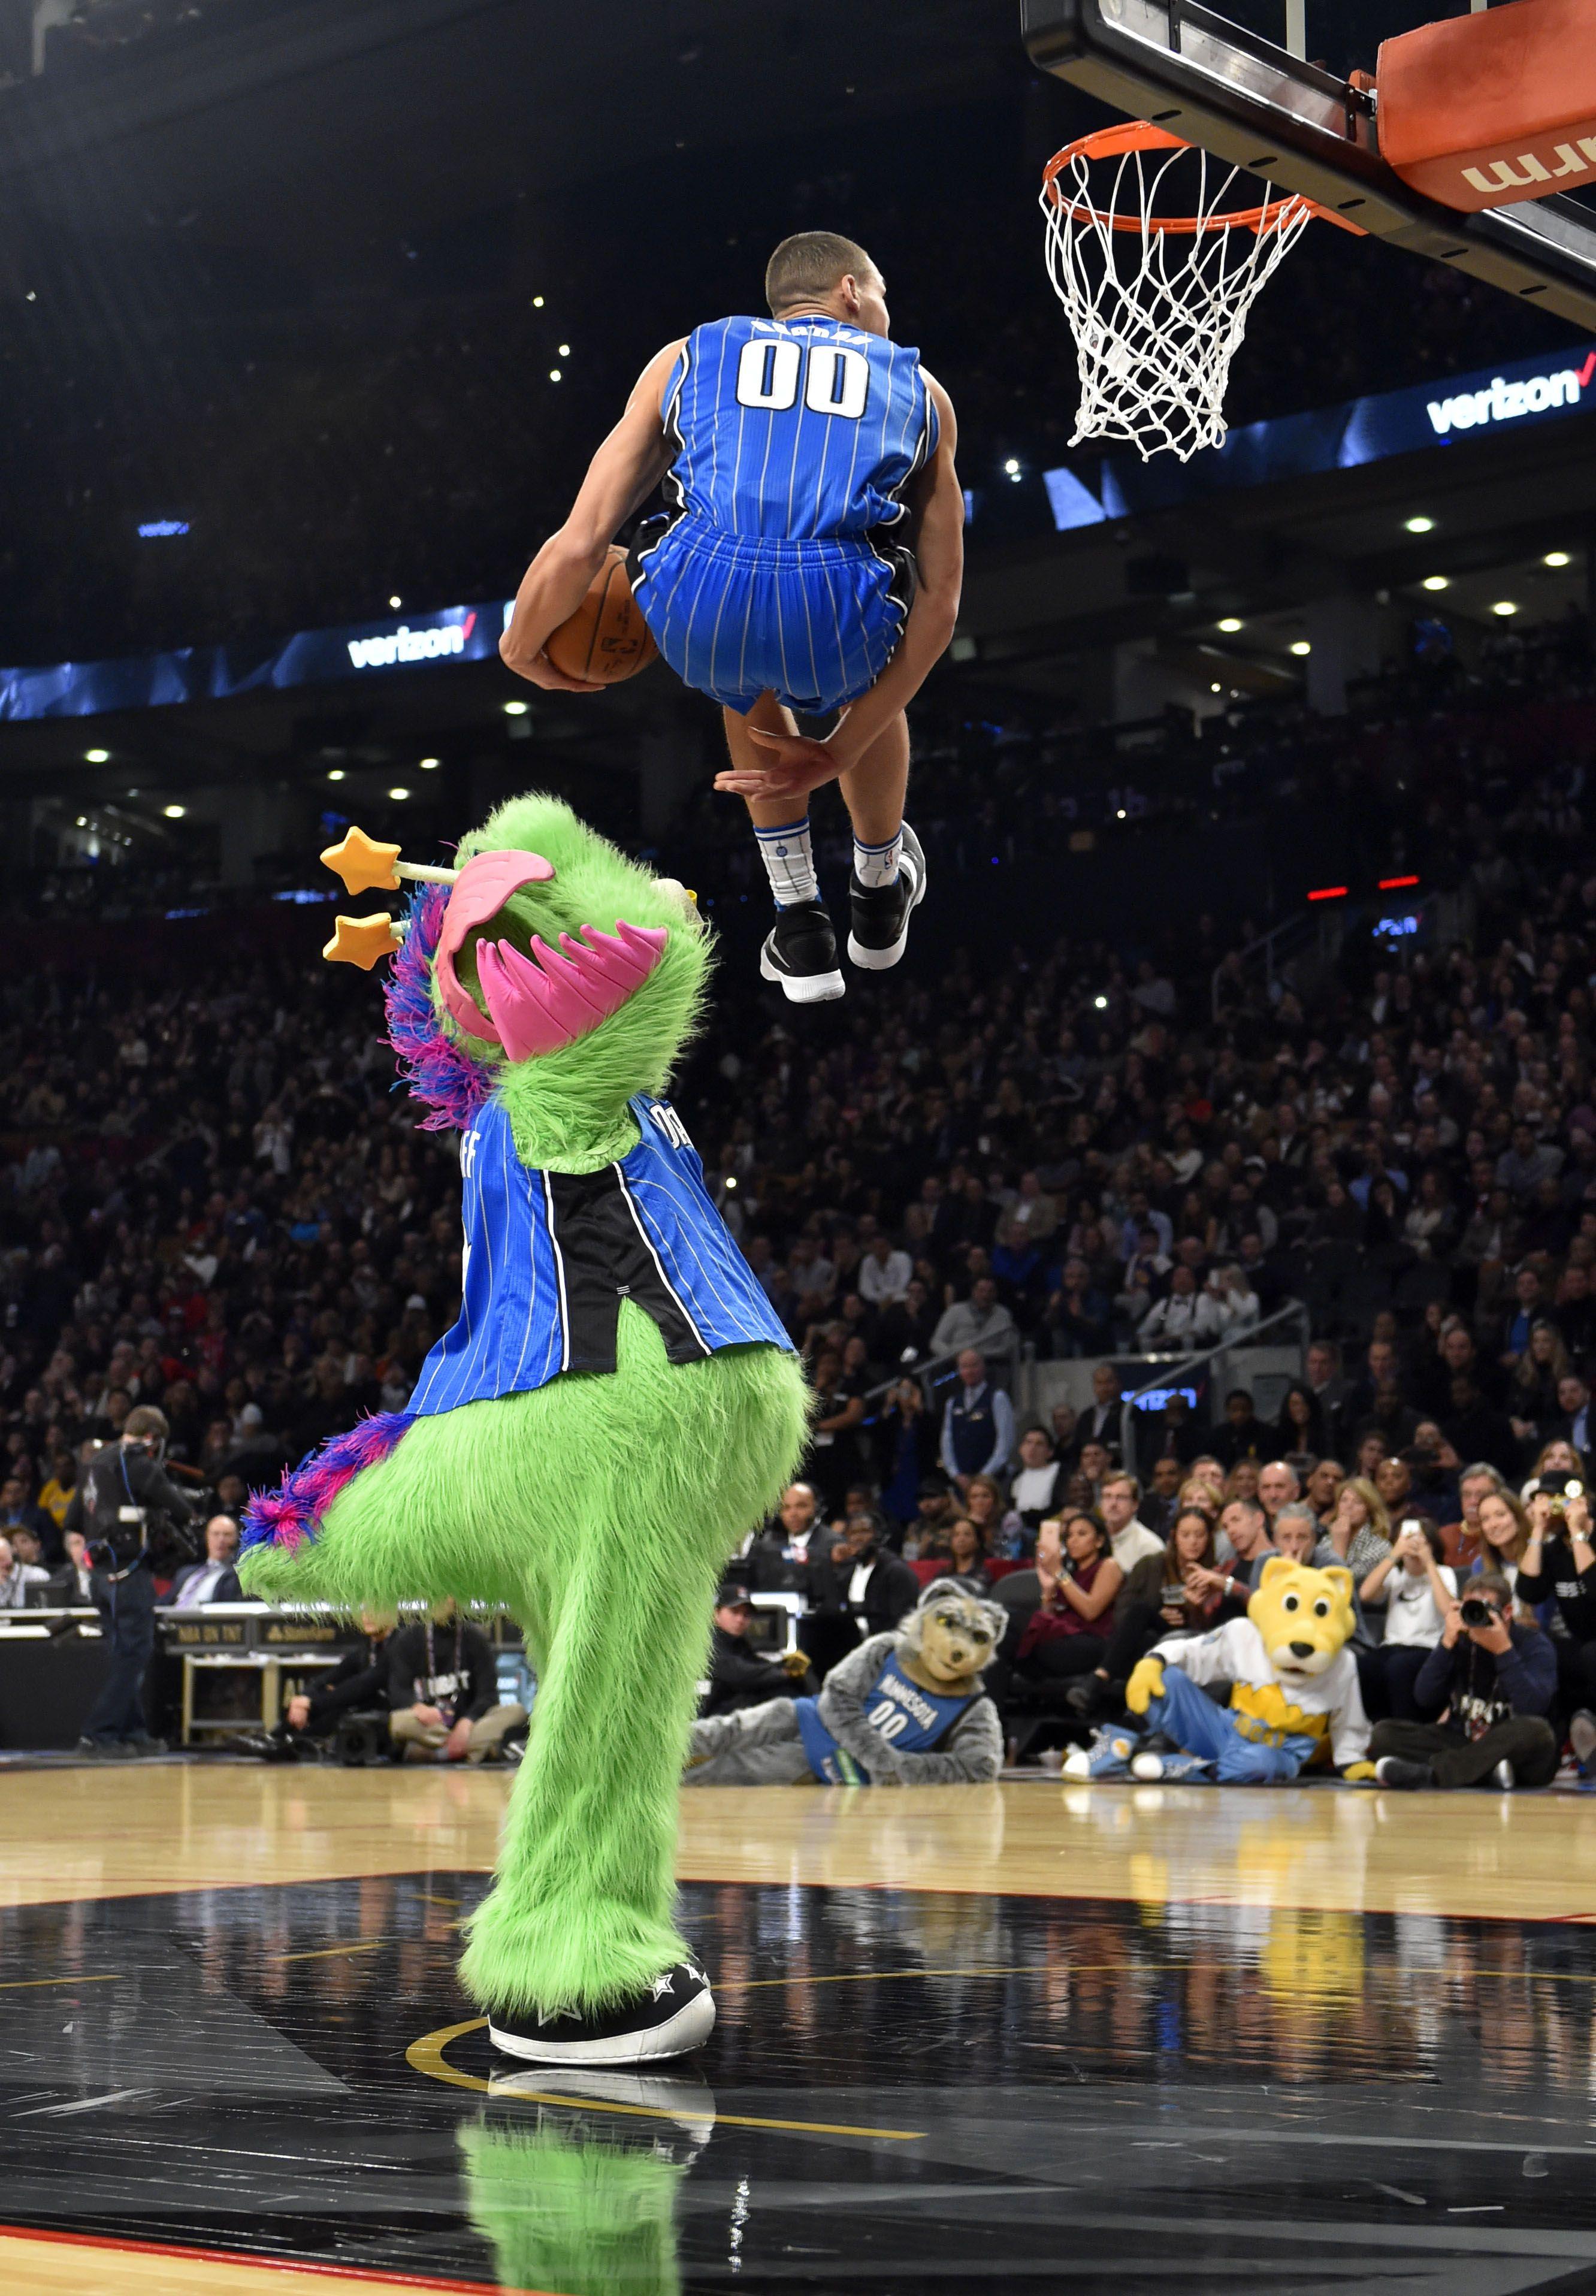 The 2016 NBA Dunk Contest in 7 astonishing photo